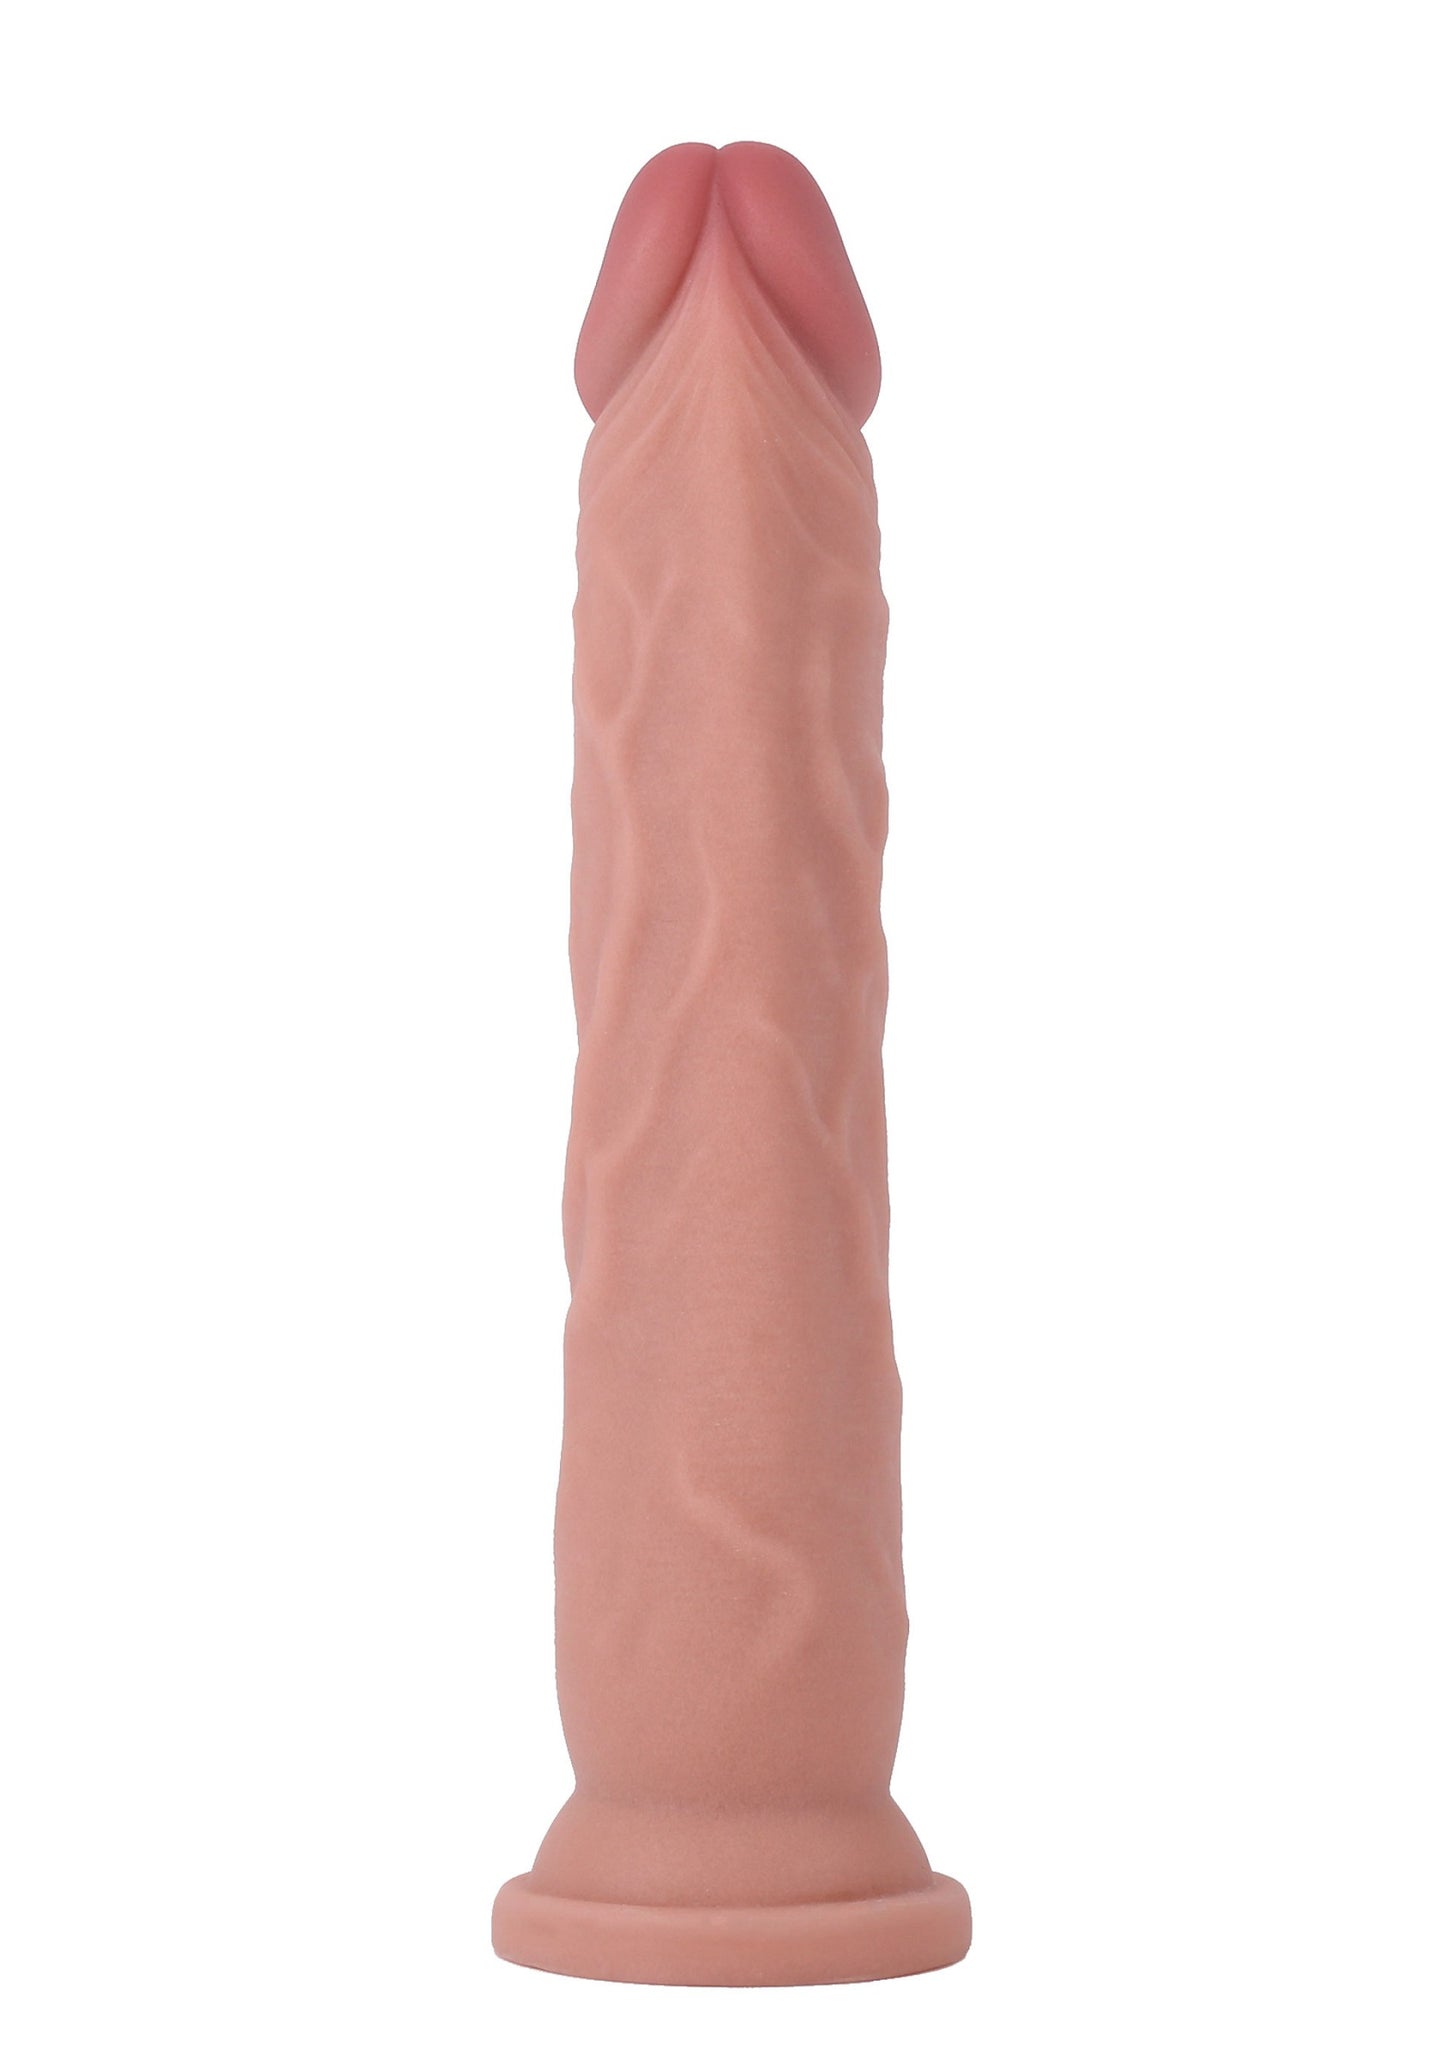 ToyJoy Get Real Deluxe Dual Density Dong 9' SKIN - 4